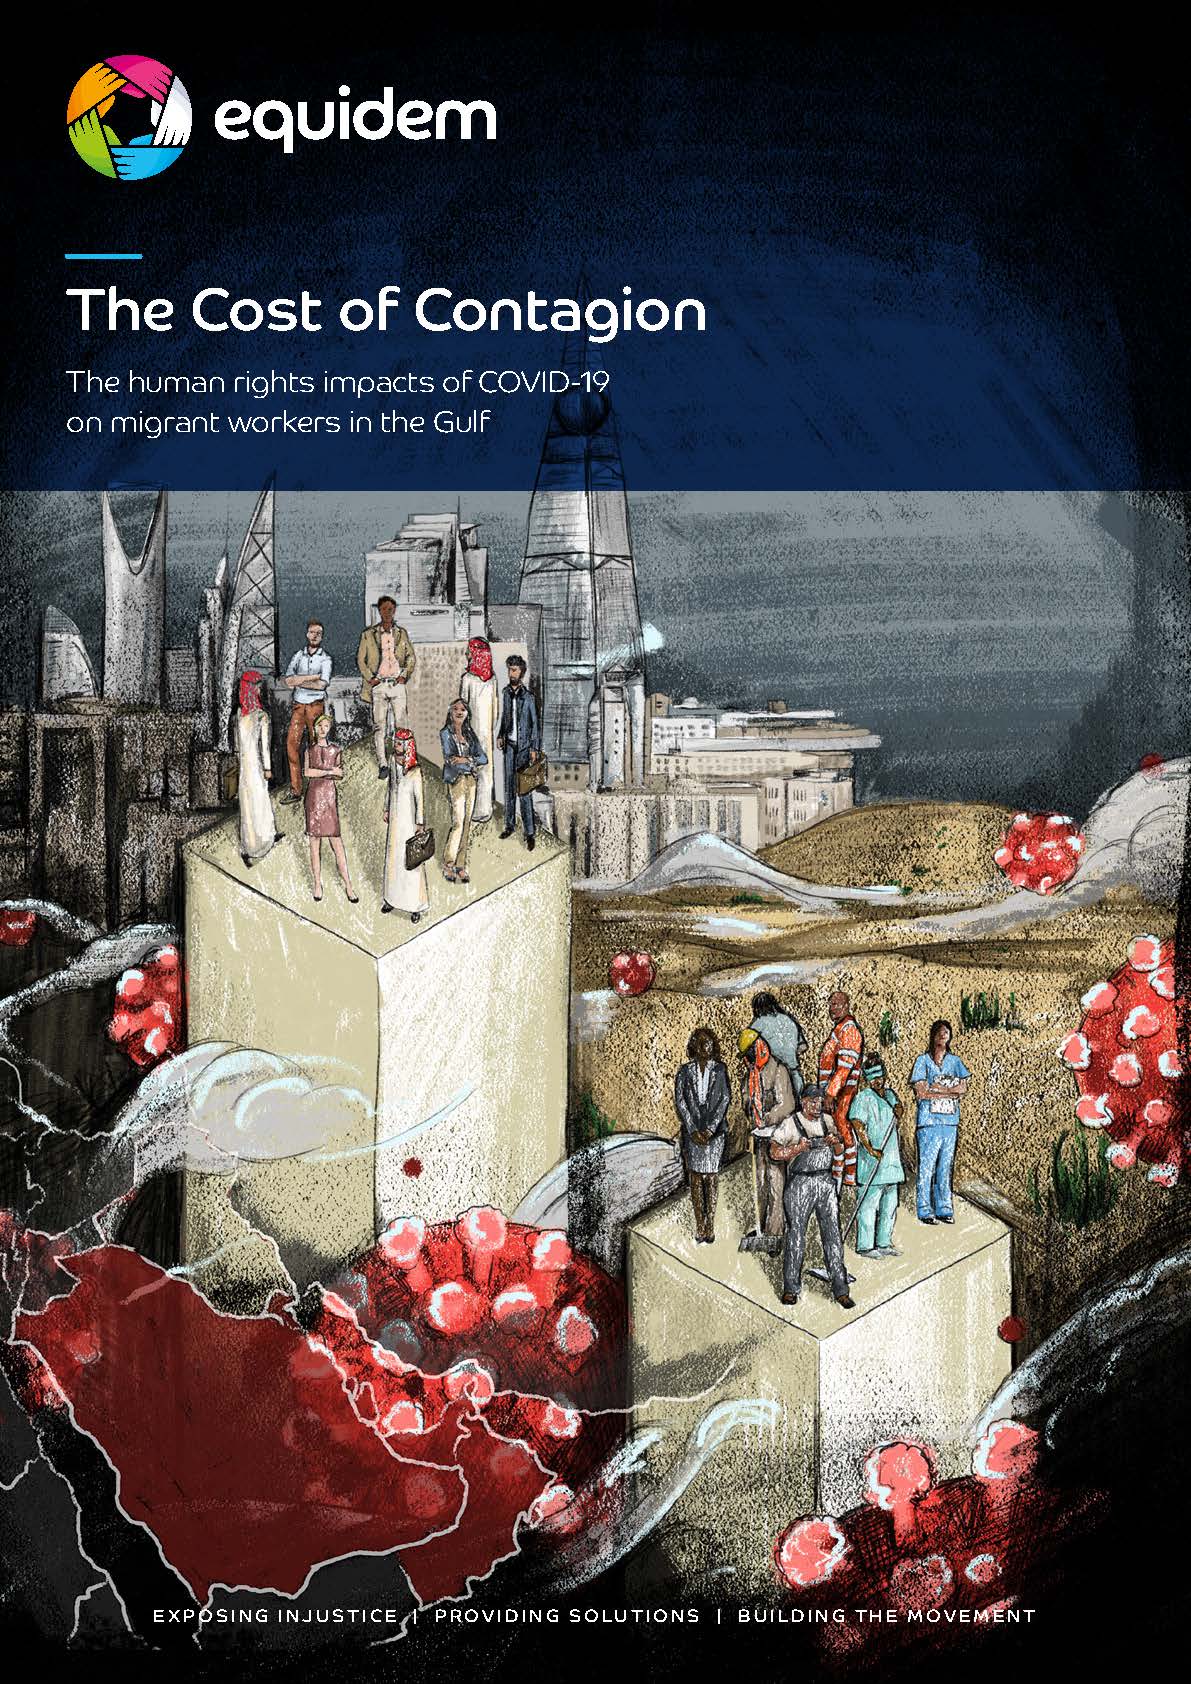 https://www.equidem.org/assets/images/common/1837_Equidem_The_Cost_of_Congation_Report_ART_WEB_Page_01.jpeg